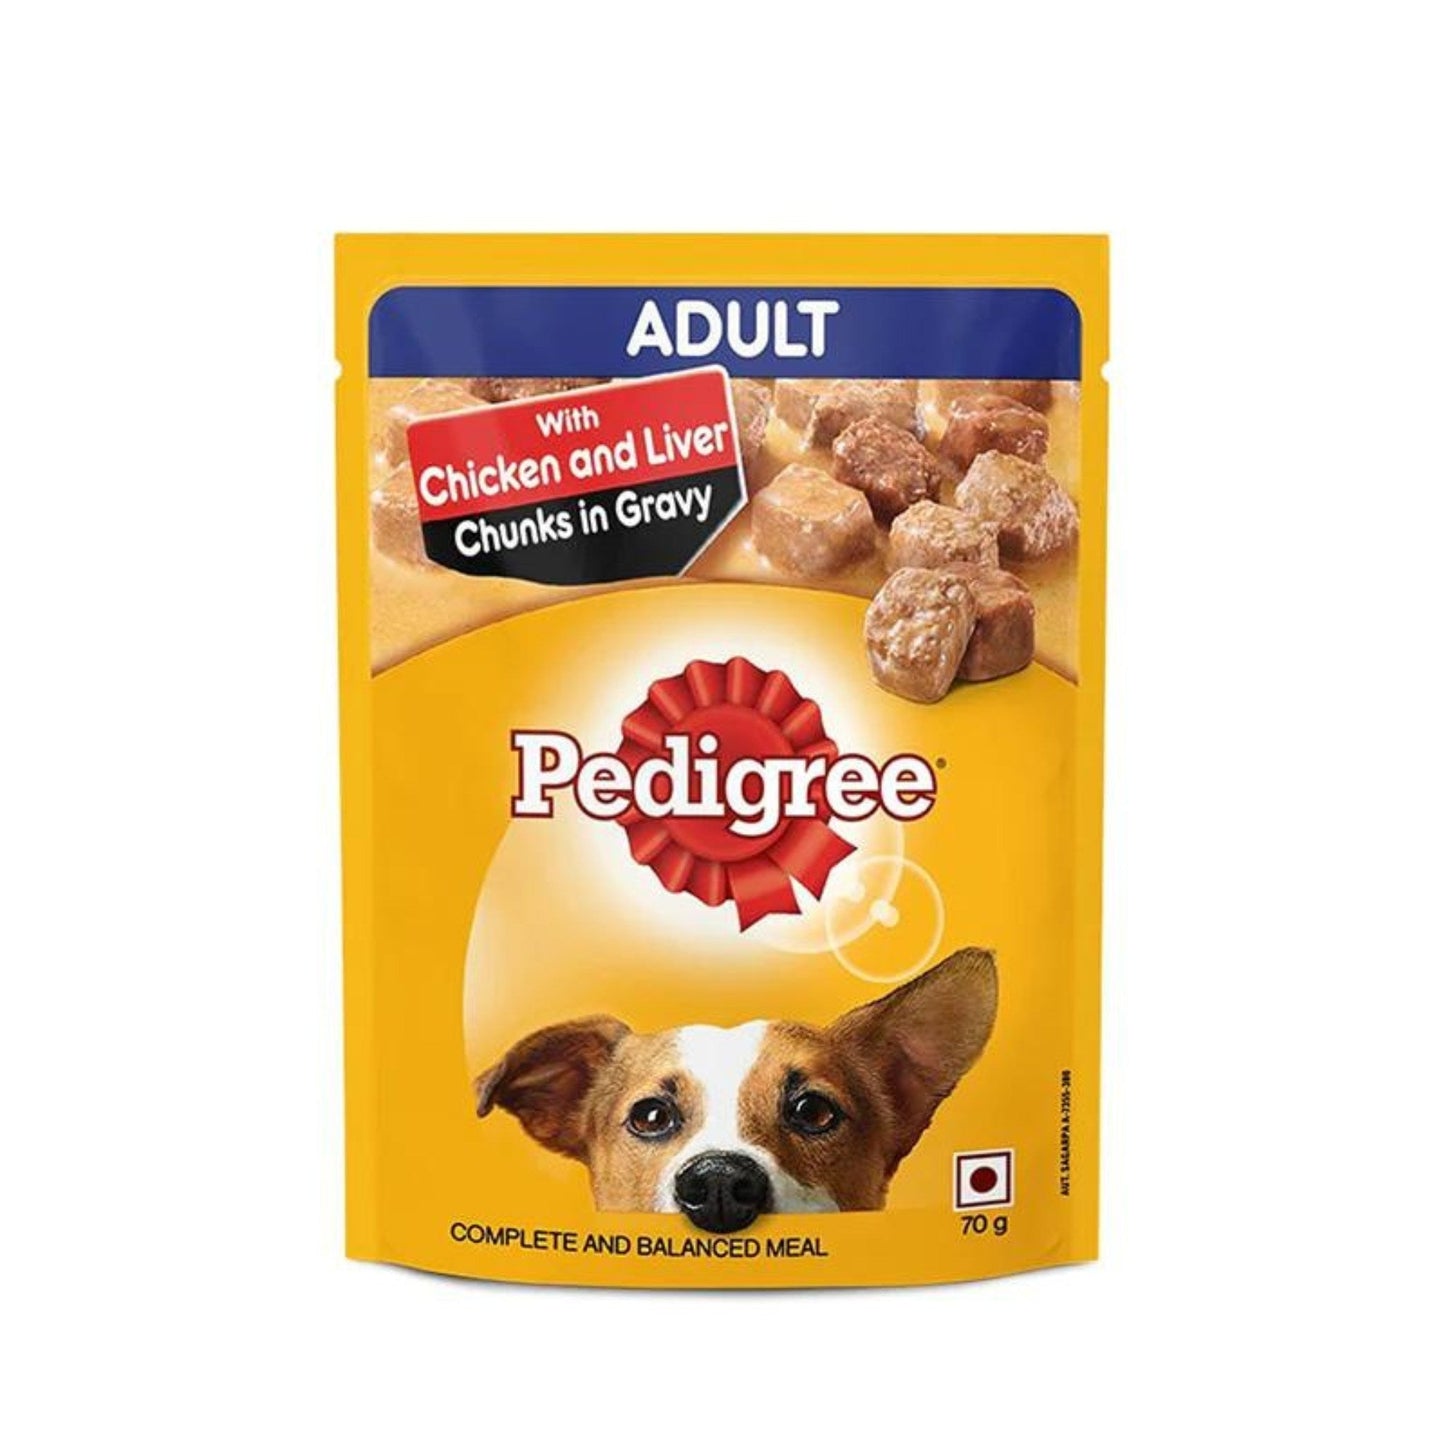 Pedigree Adult Dog Food, Chicken and liver Chunks in Gravy, Pack of 45